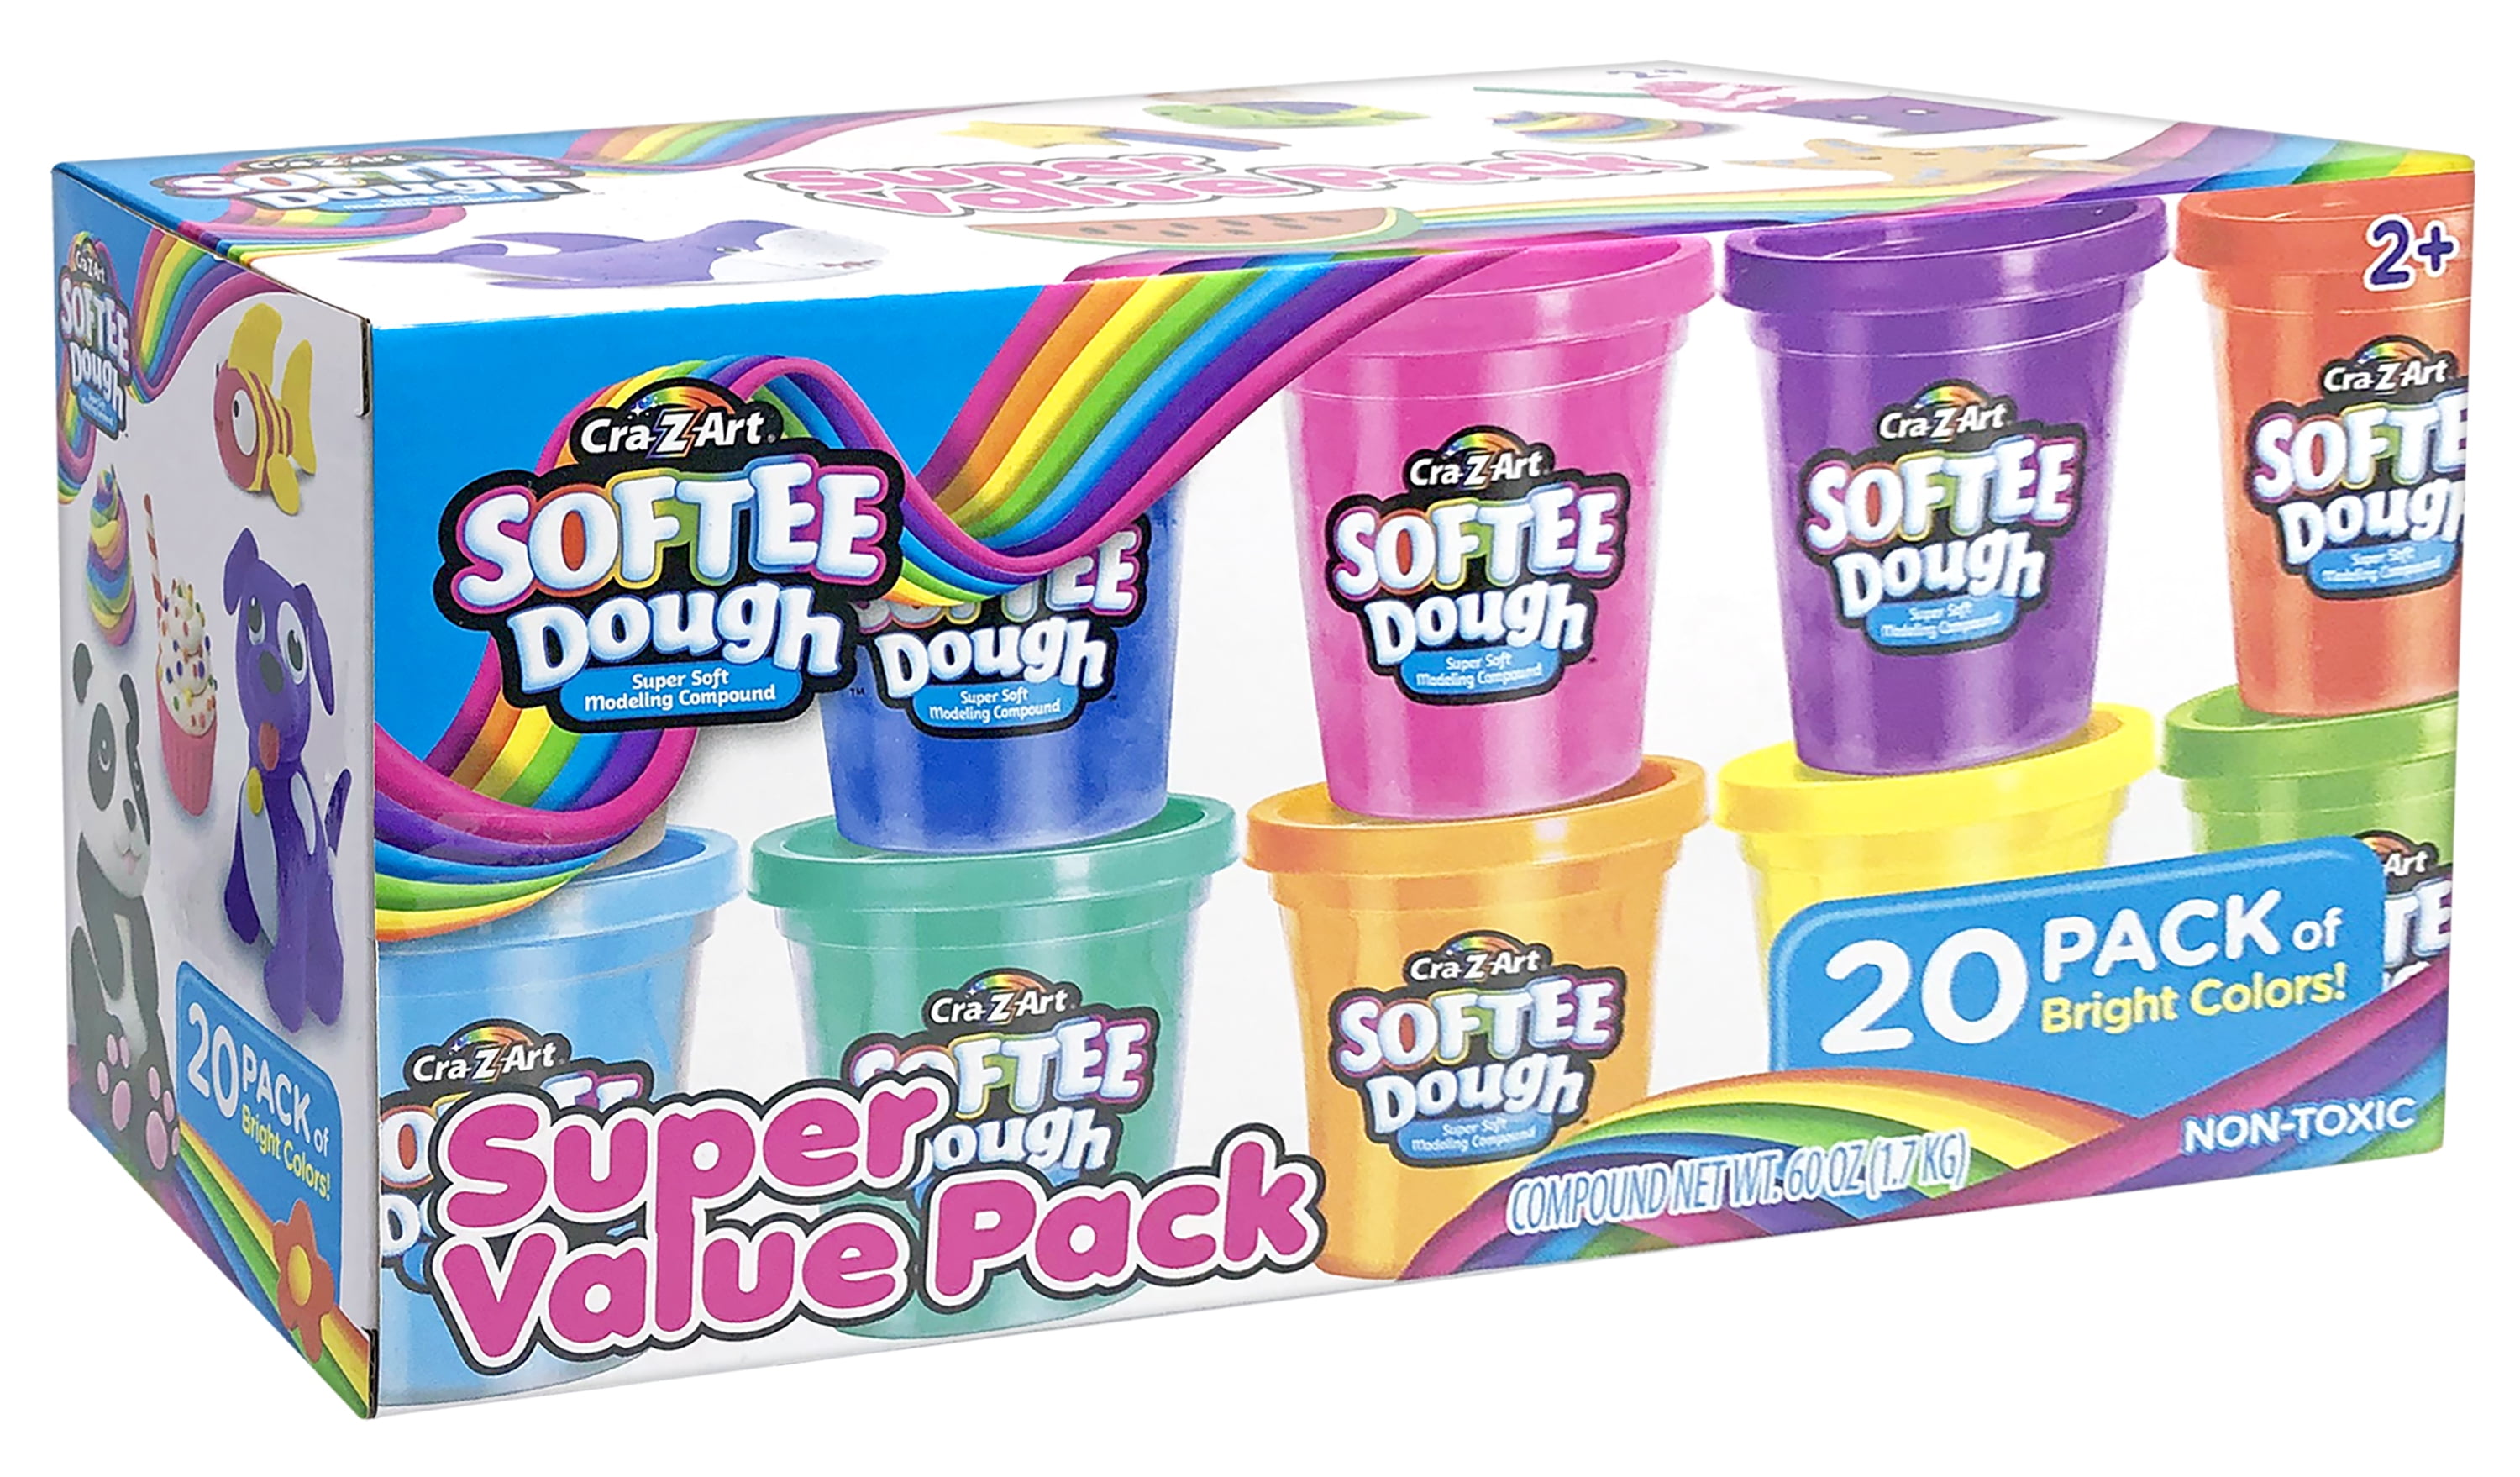 Play-Doh Super 20 Color Can Playset – Art Therapy